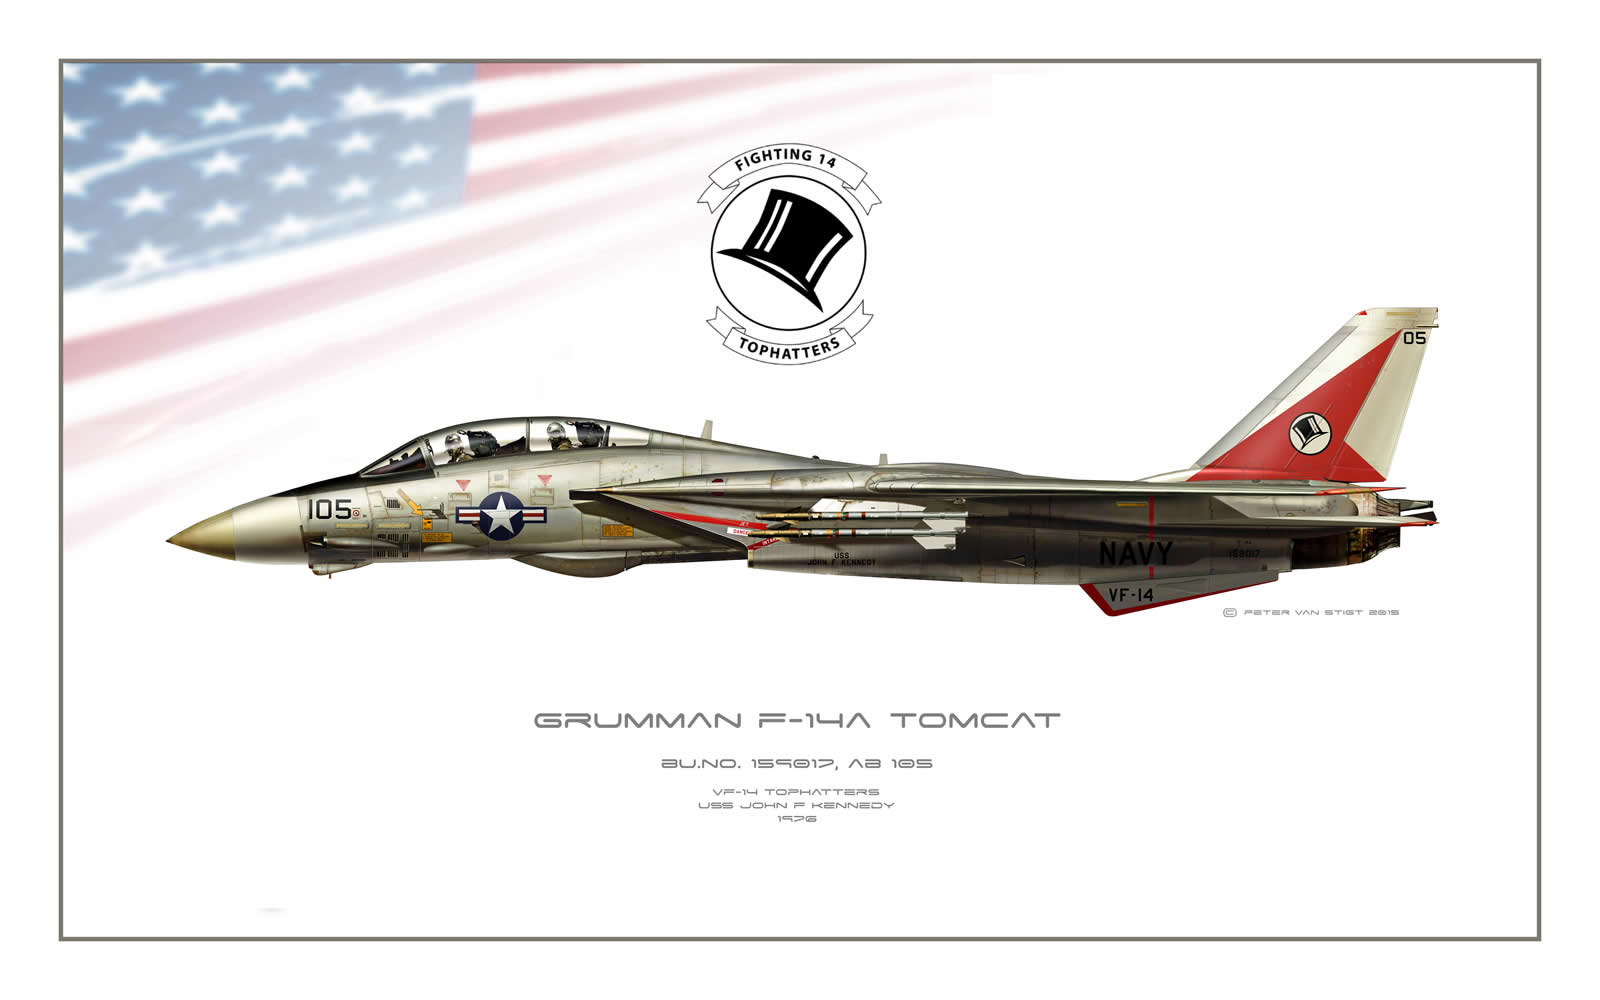 VF-14 Tophatters F-14 Tomcat Profile